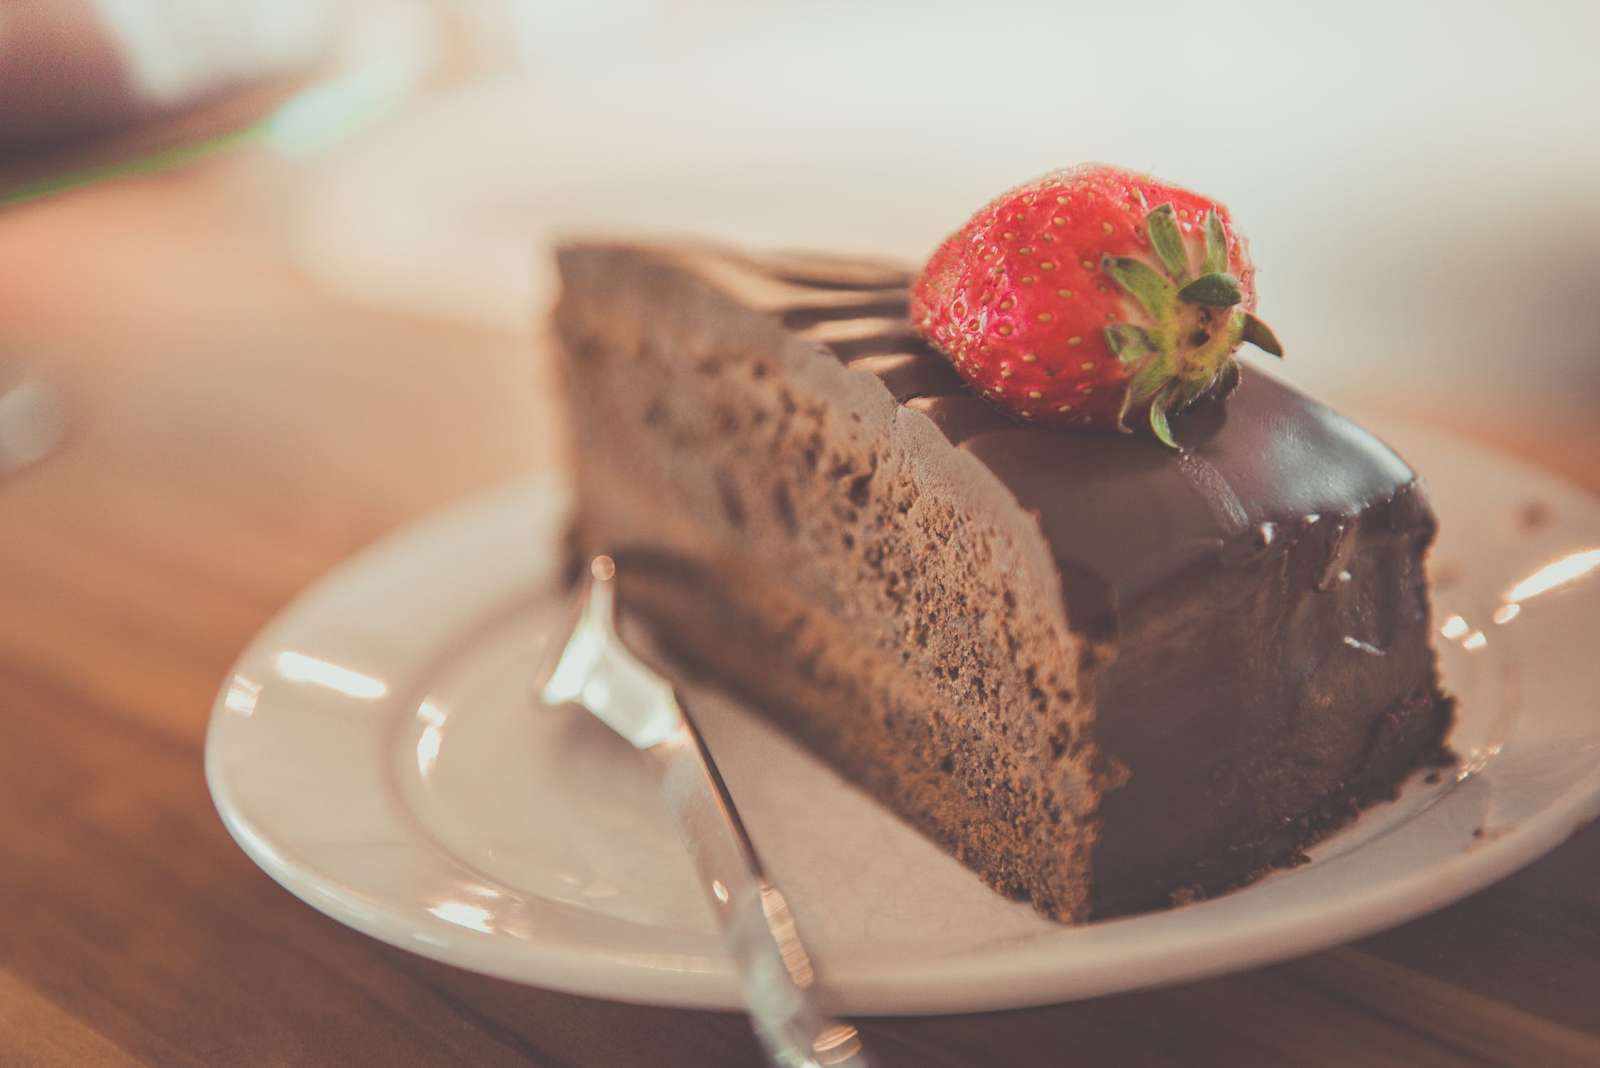 Chocolate cake slice with strawberry on top